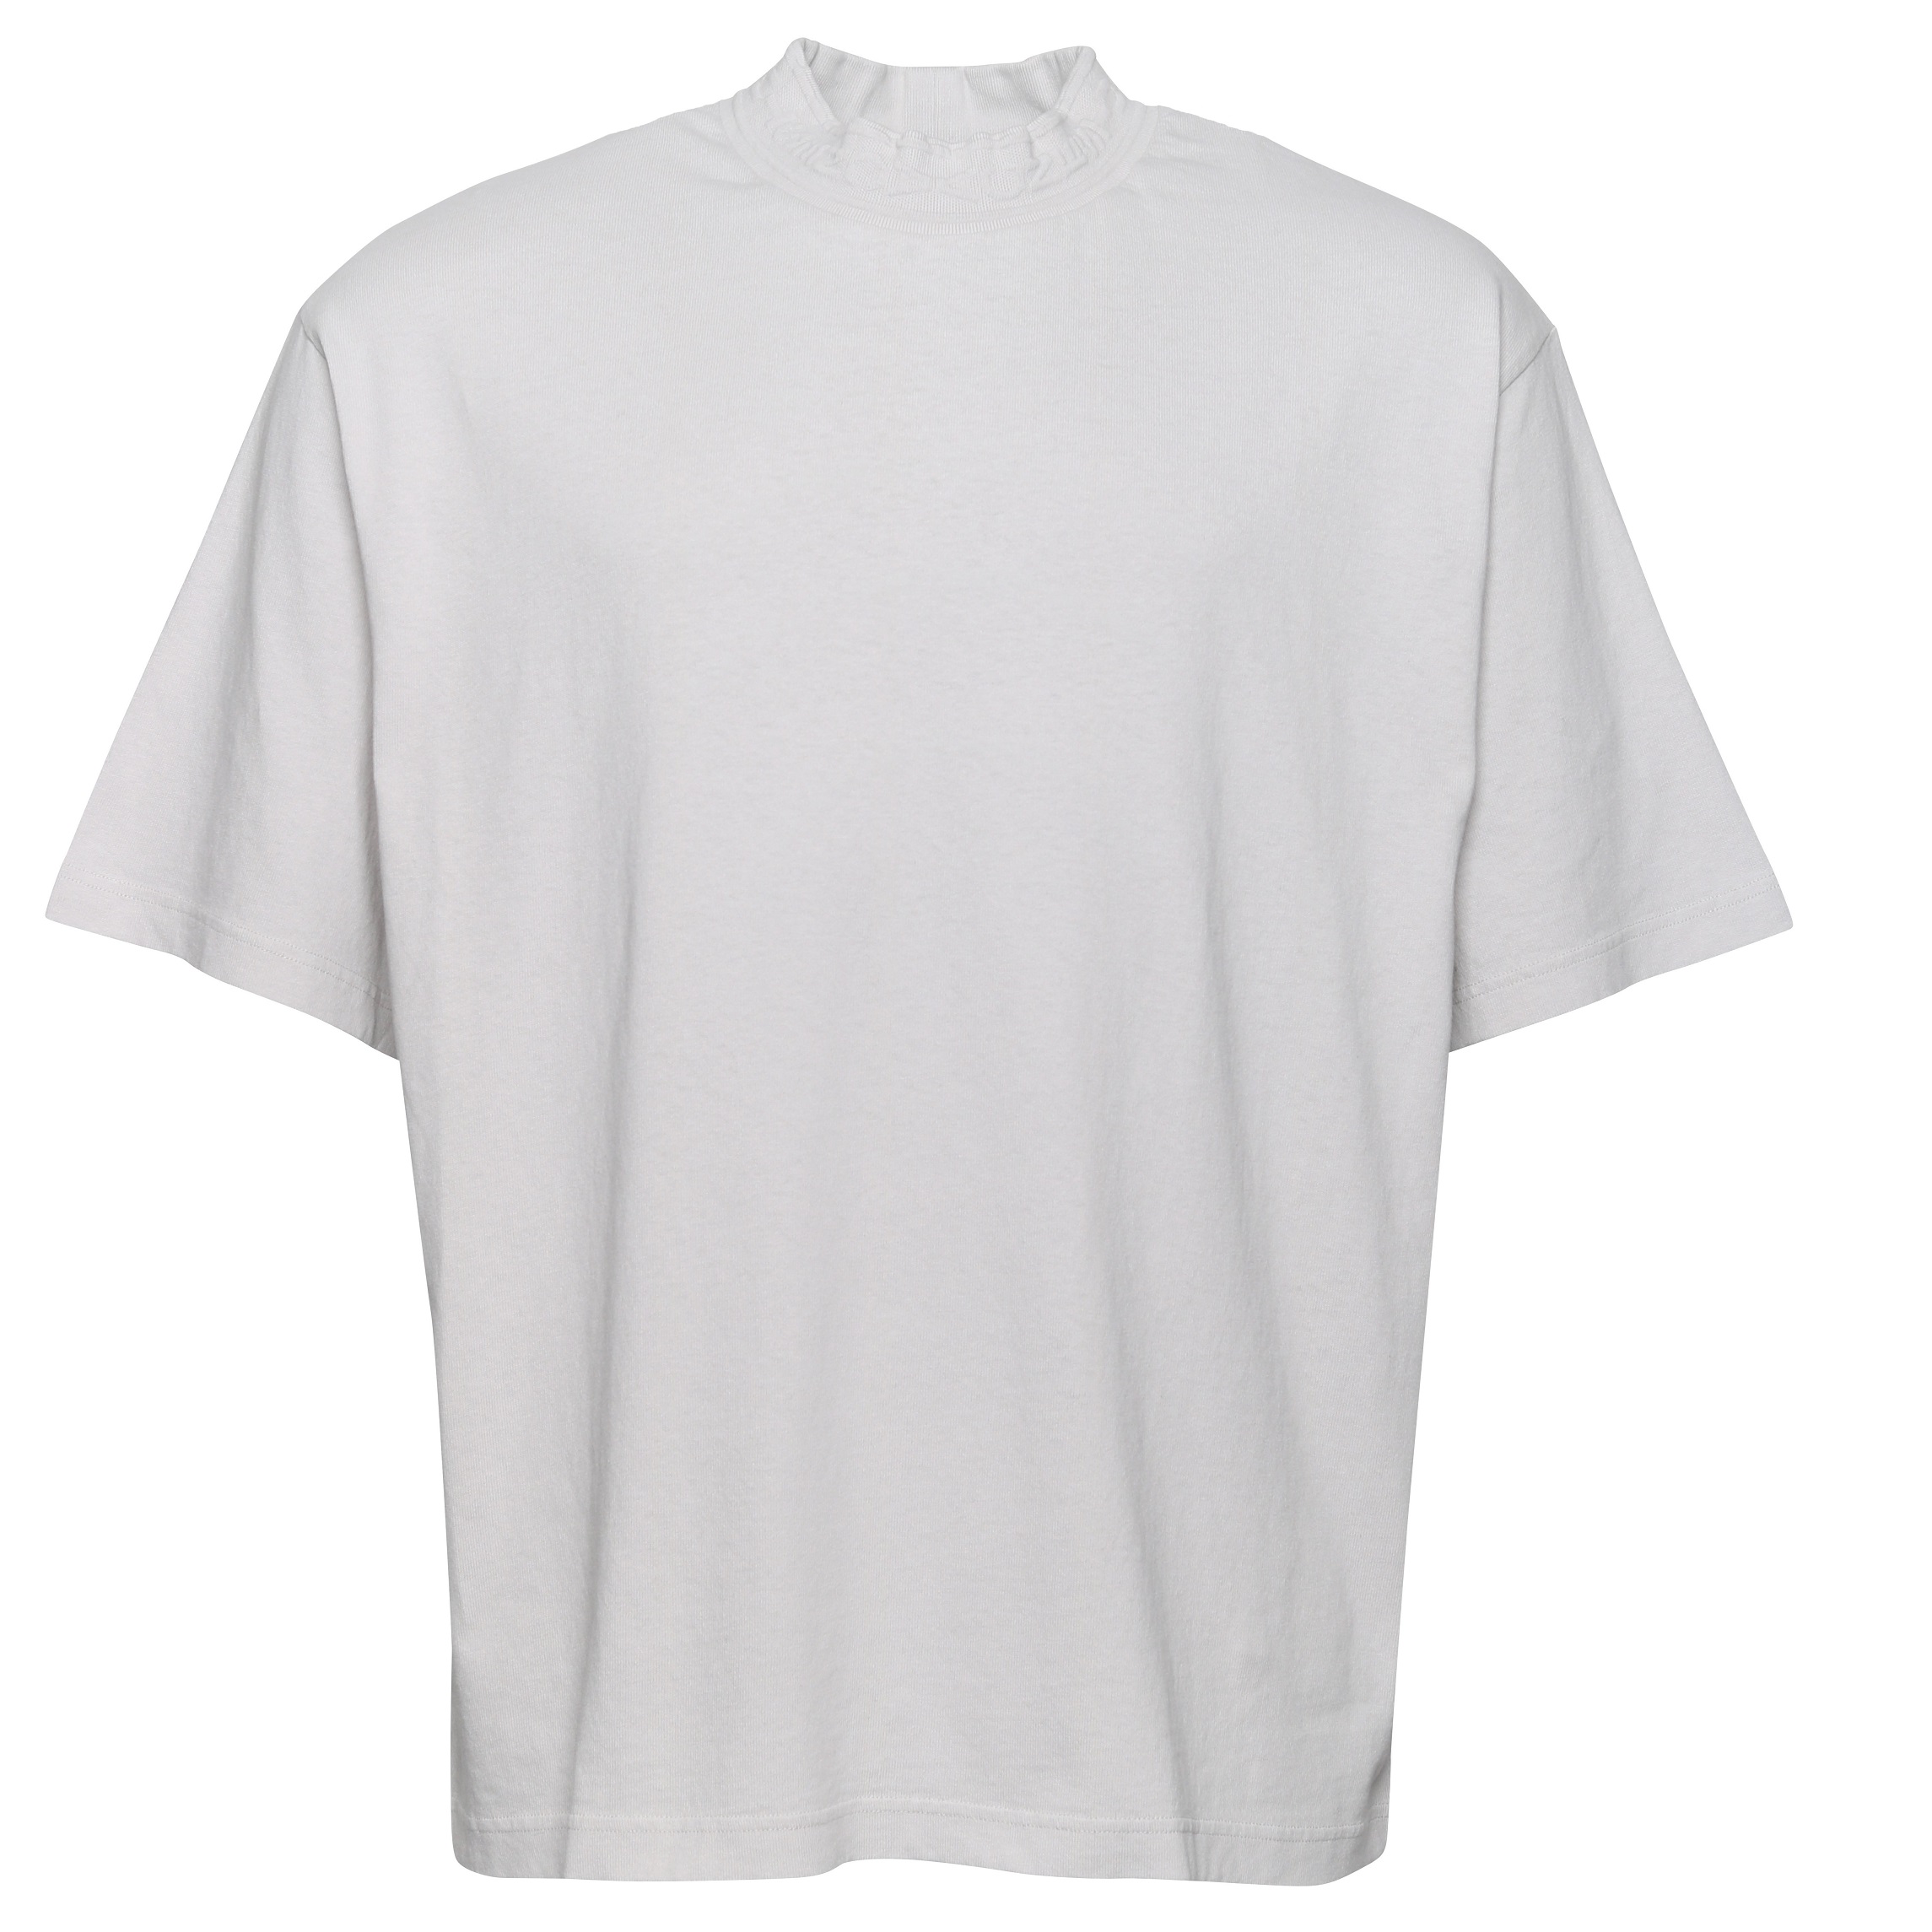 Acne Studios Loose Fit Logo Tape T-Shirt in Cold White S